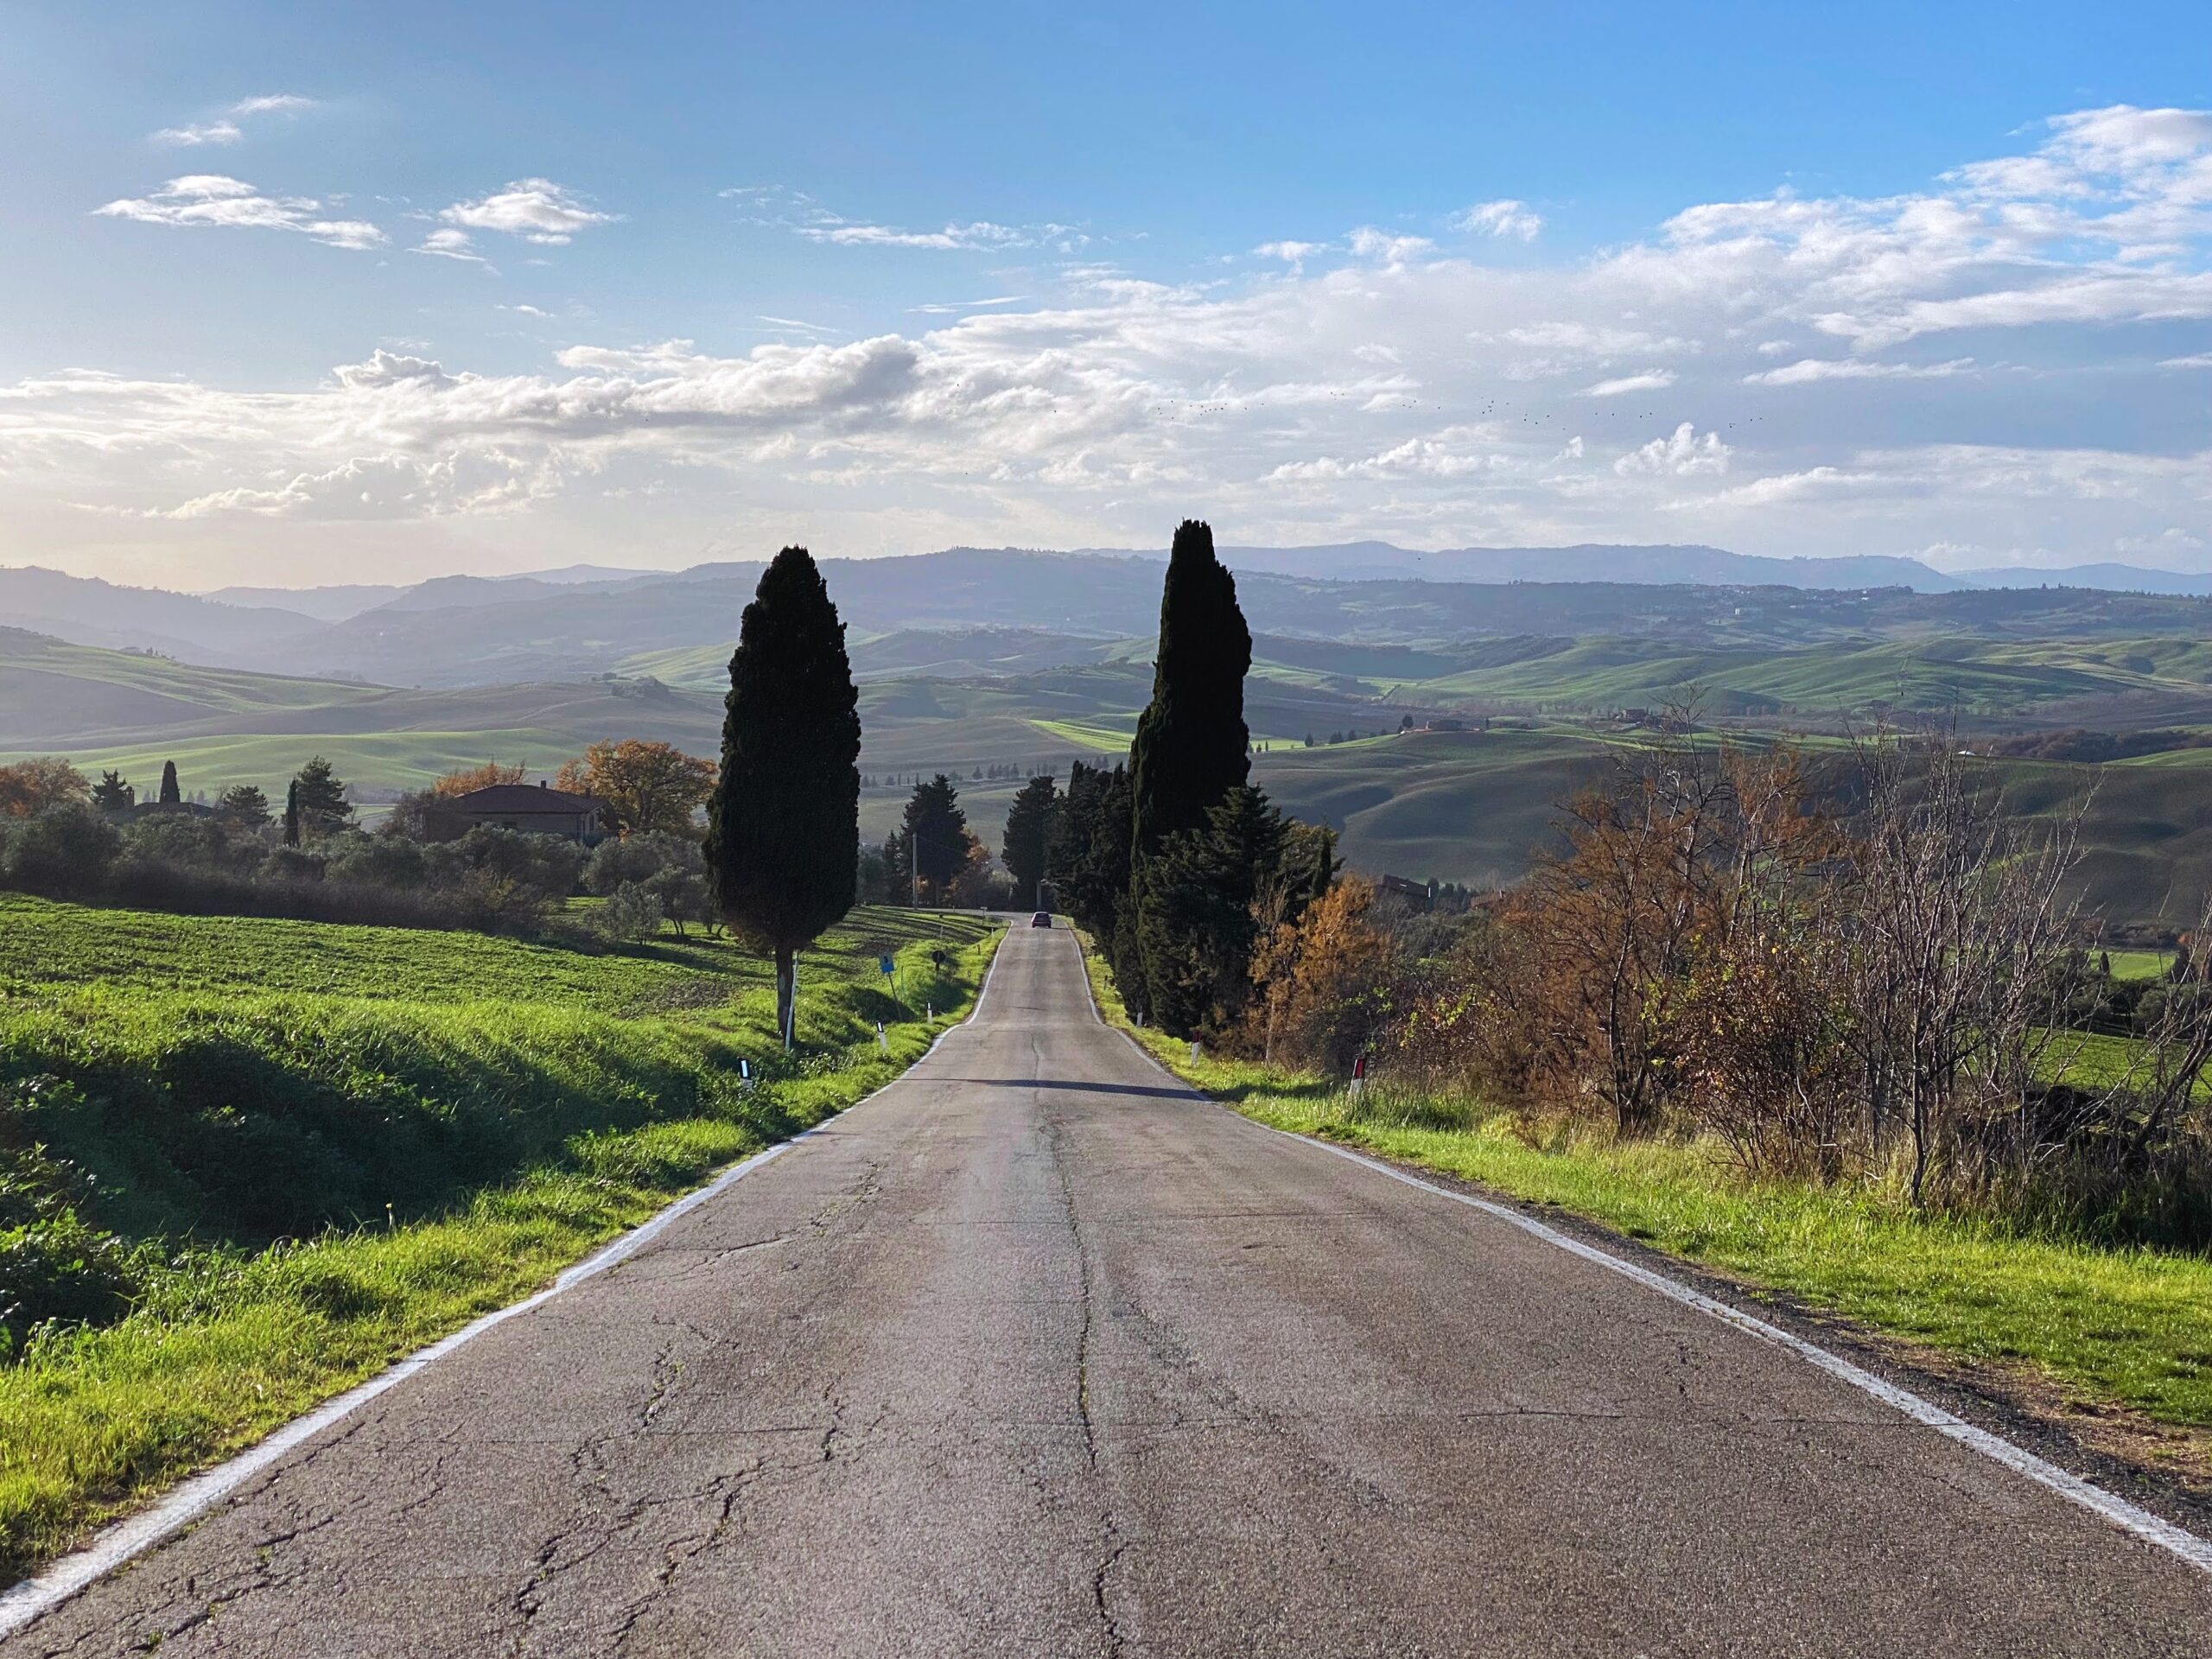 Cypress trees line on the sides of a road in the Val d'Orcia in Tuscany, Italy.